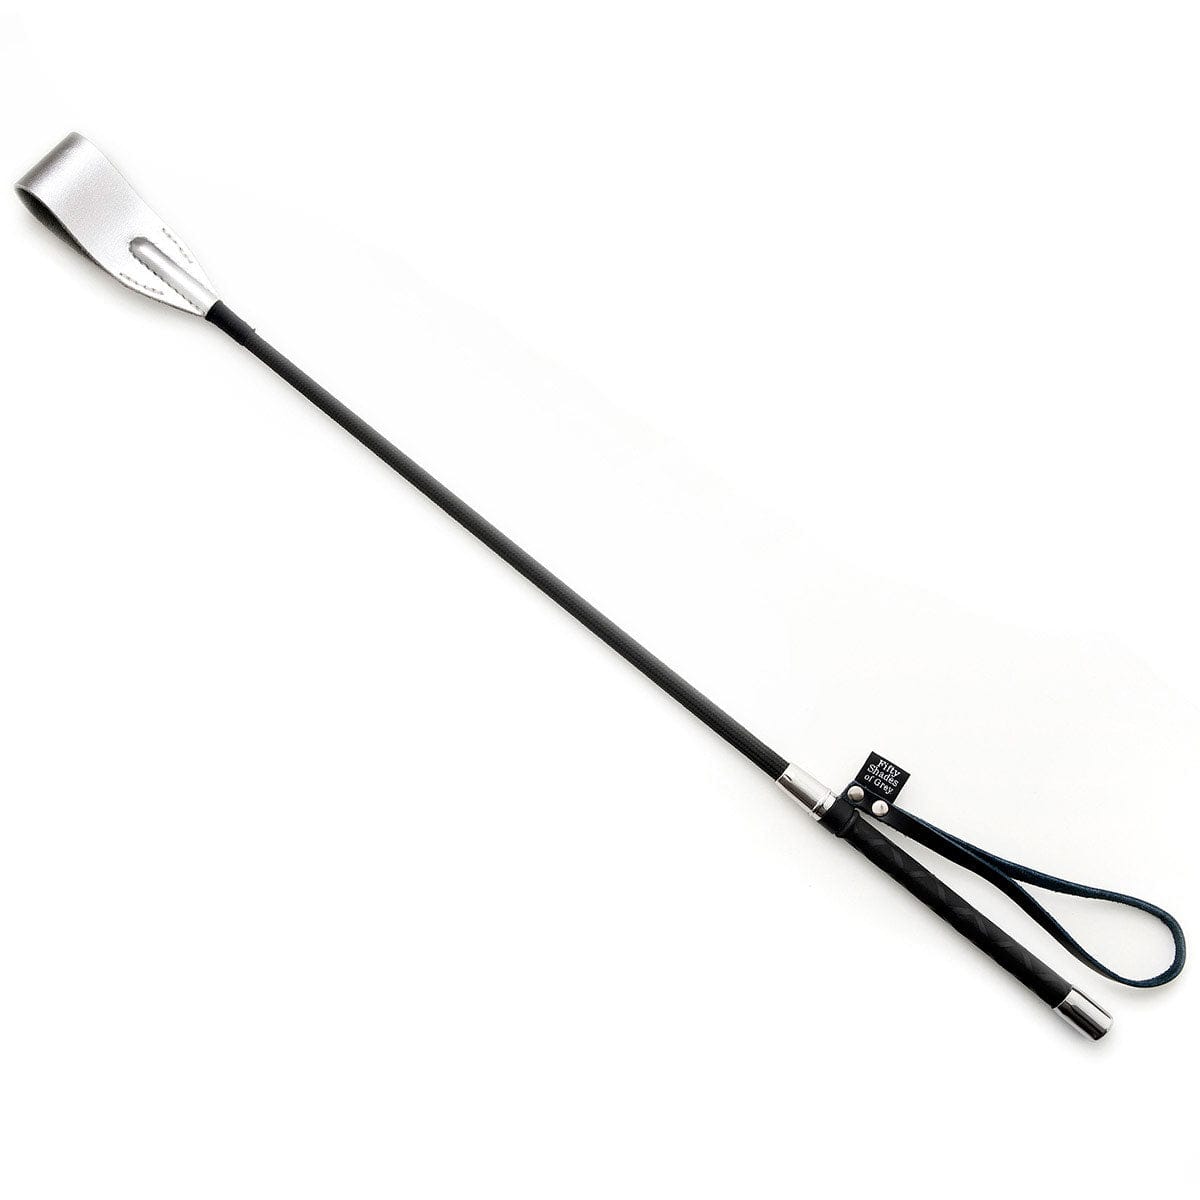 FIFTY SHADES SWEET STING RIDING CROP by Lovehoney - rolik